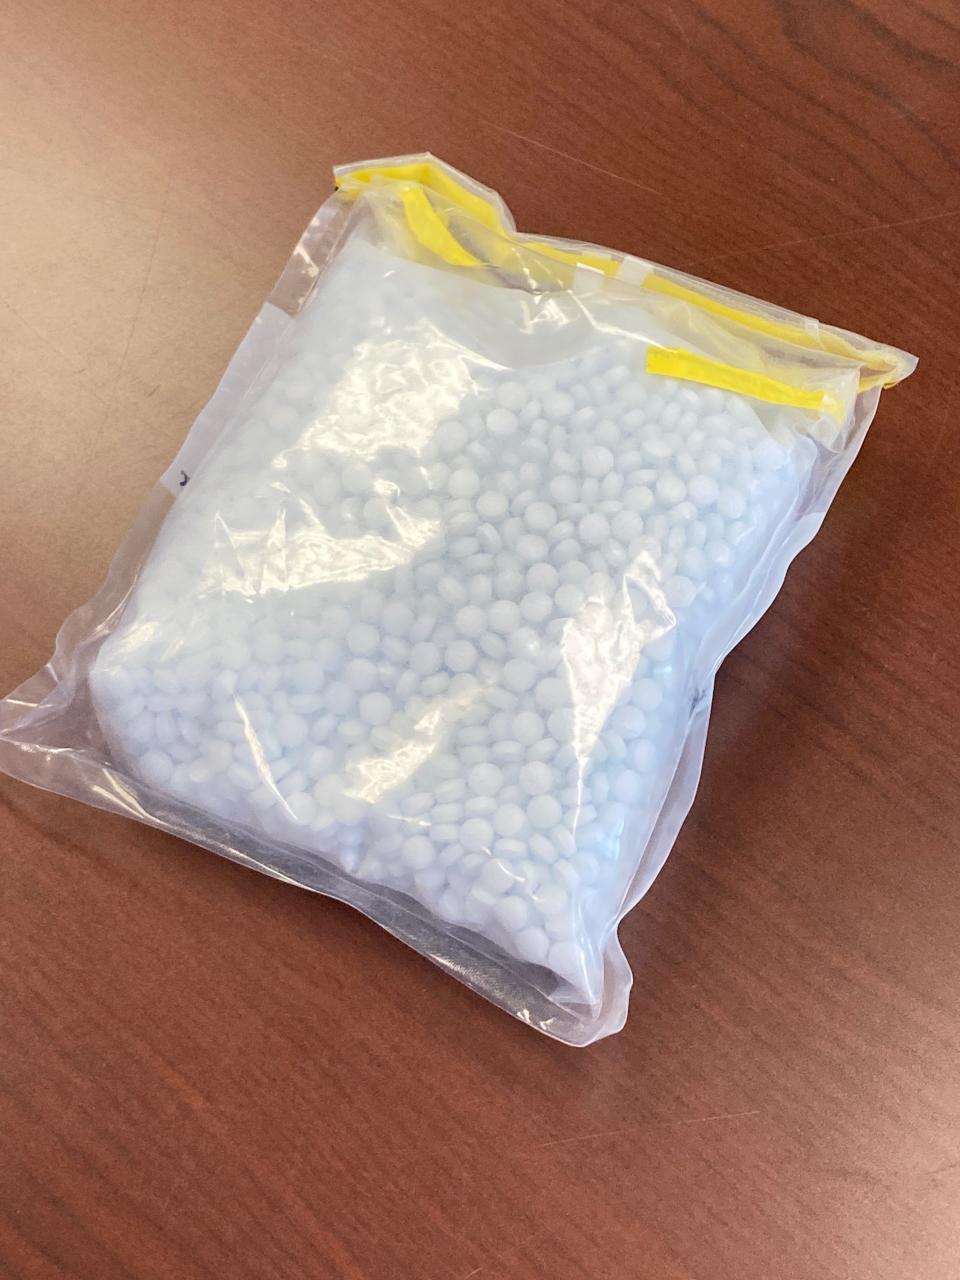 Bag of "fake" or placebo fentanyl used to demonstrate what the drug looks like.